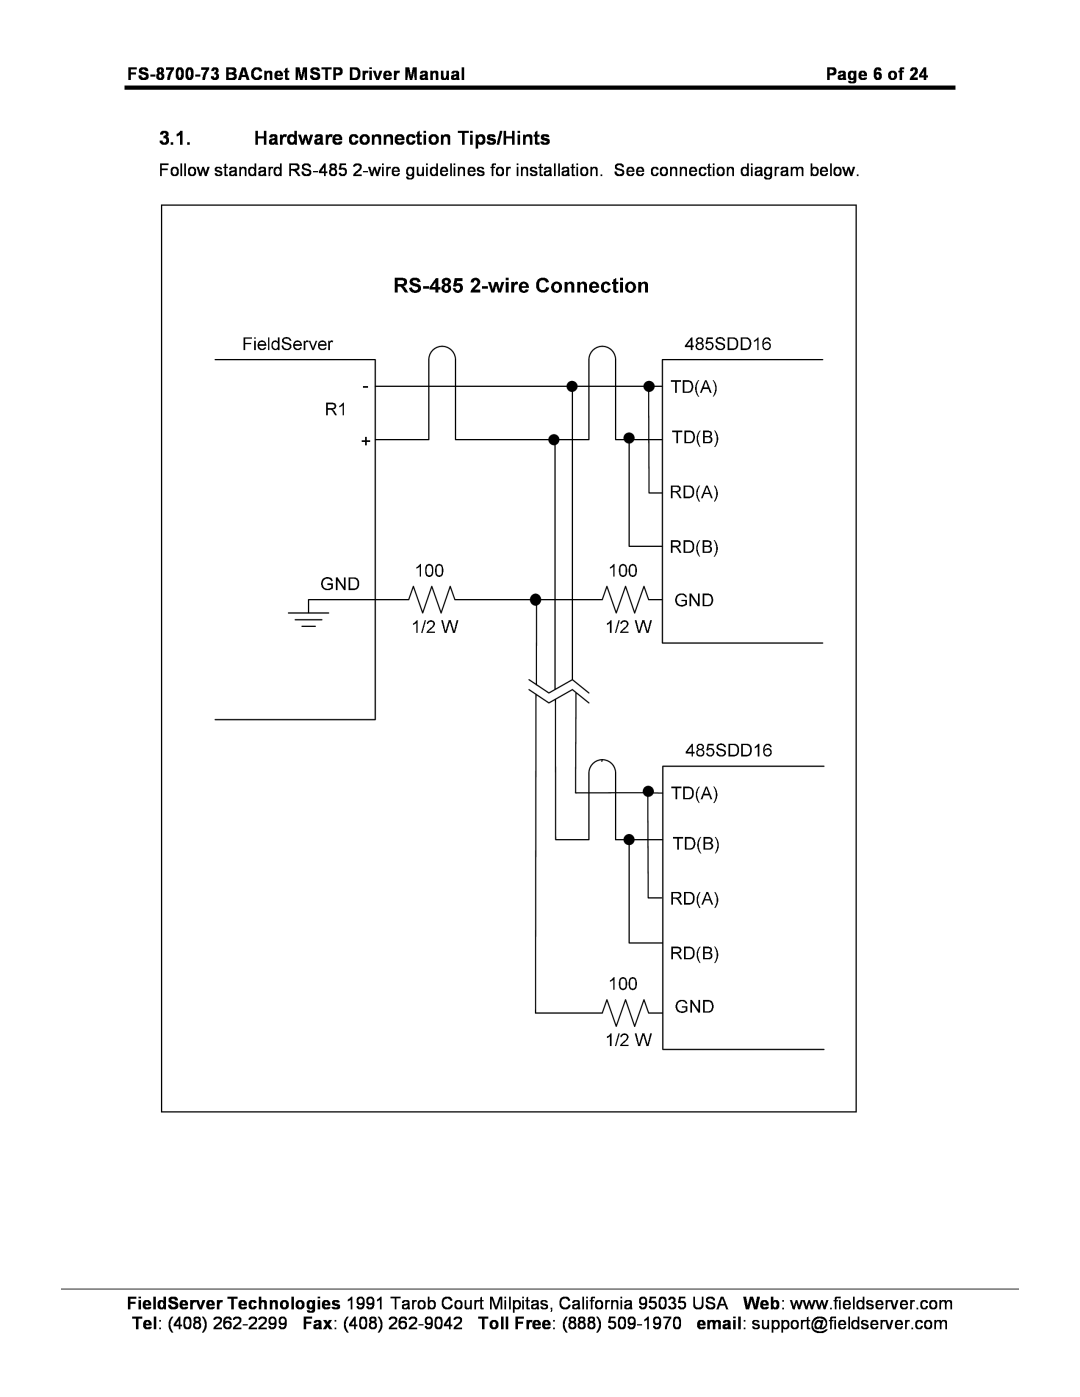 FieldServer instruction manual Hardware connection Tips/Hints, FS-8700-73 BACnet MSTP Driver Manual, Page 6 of 